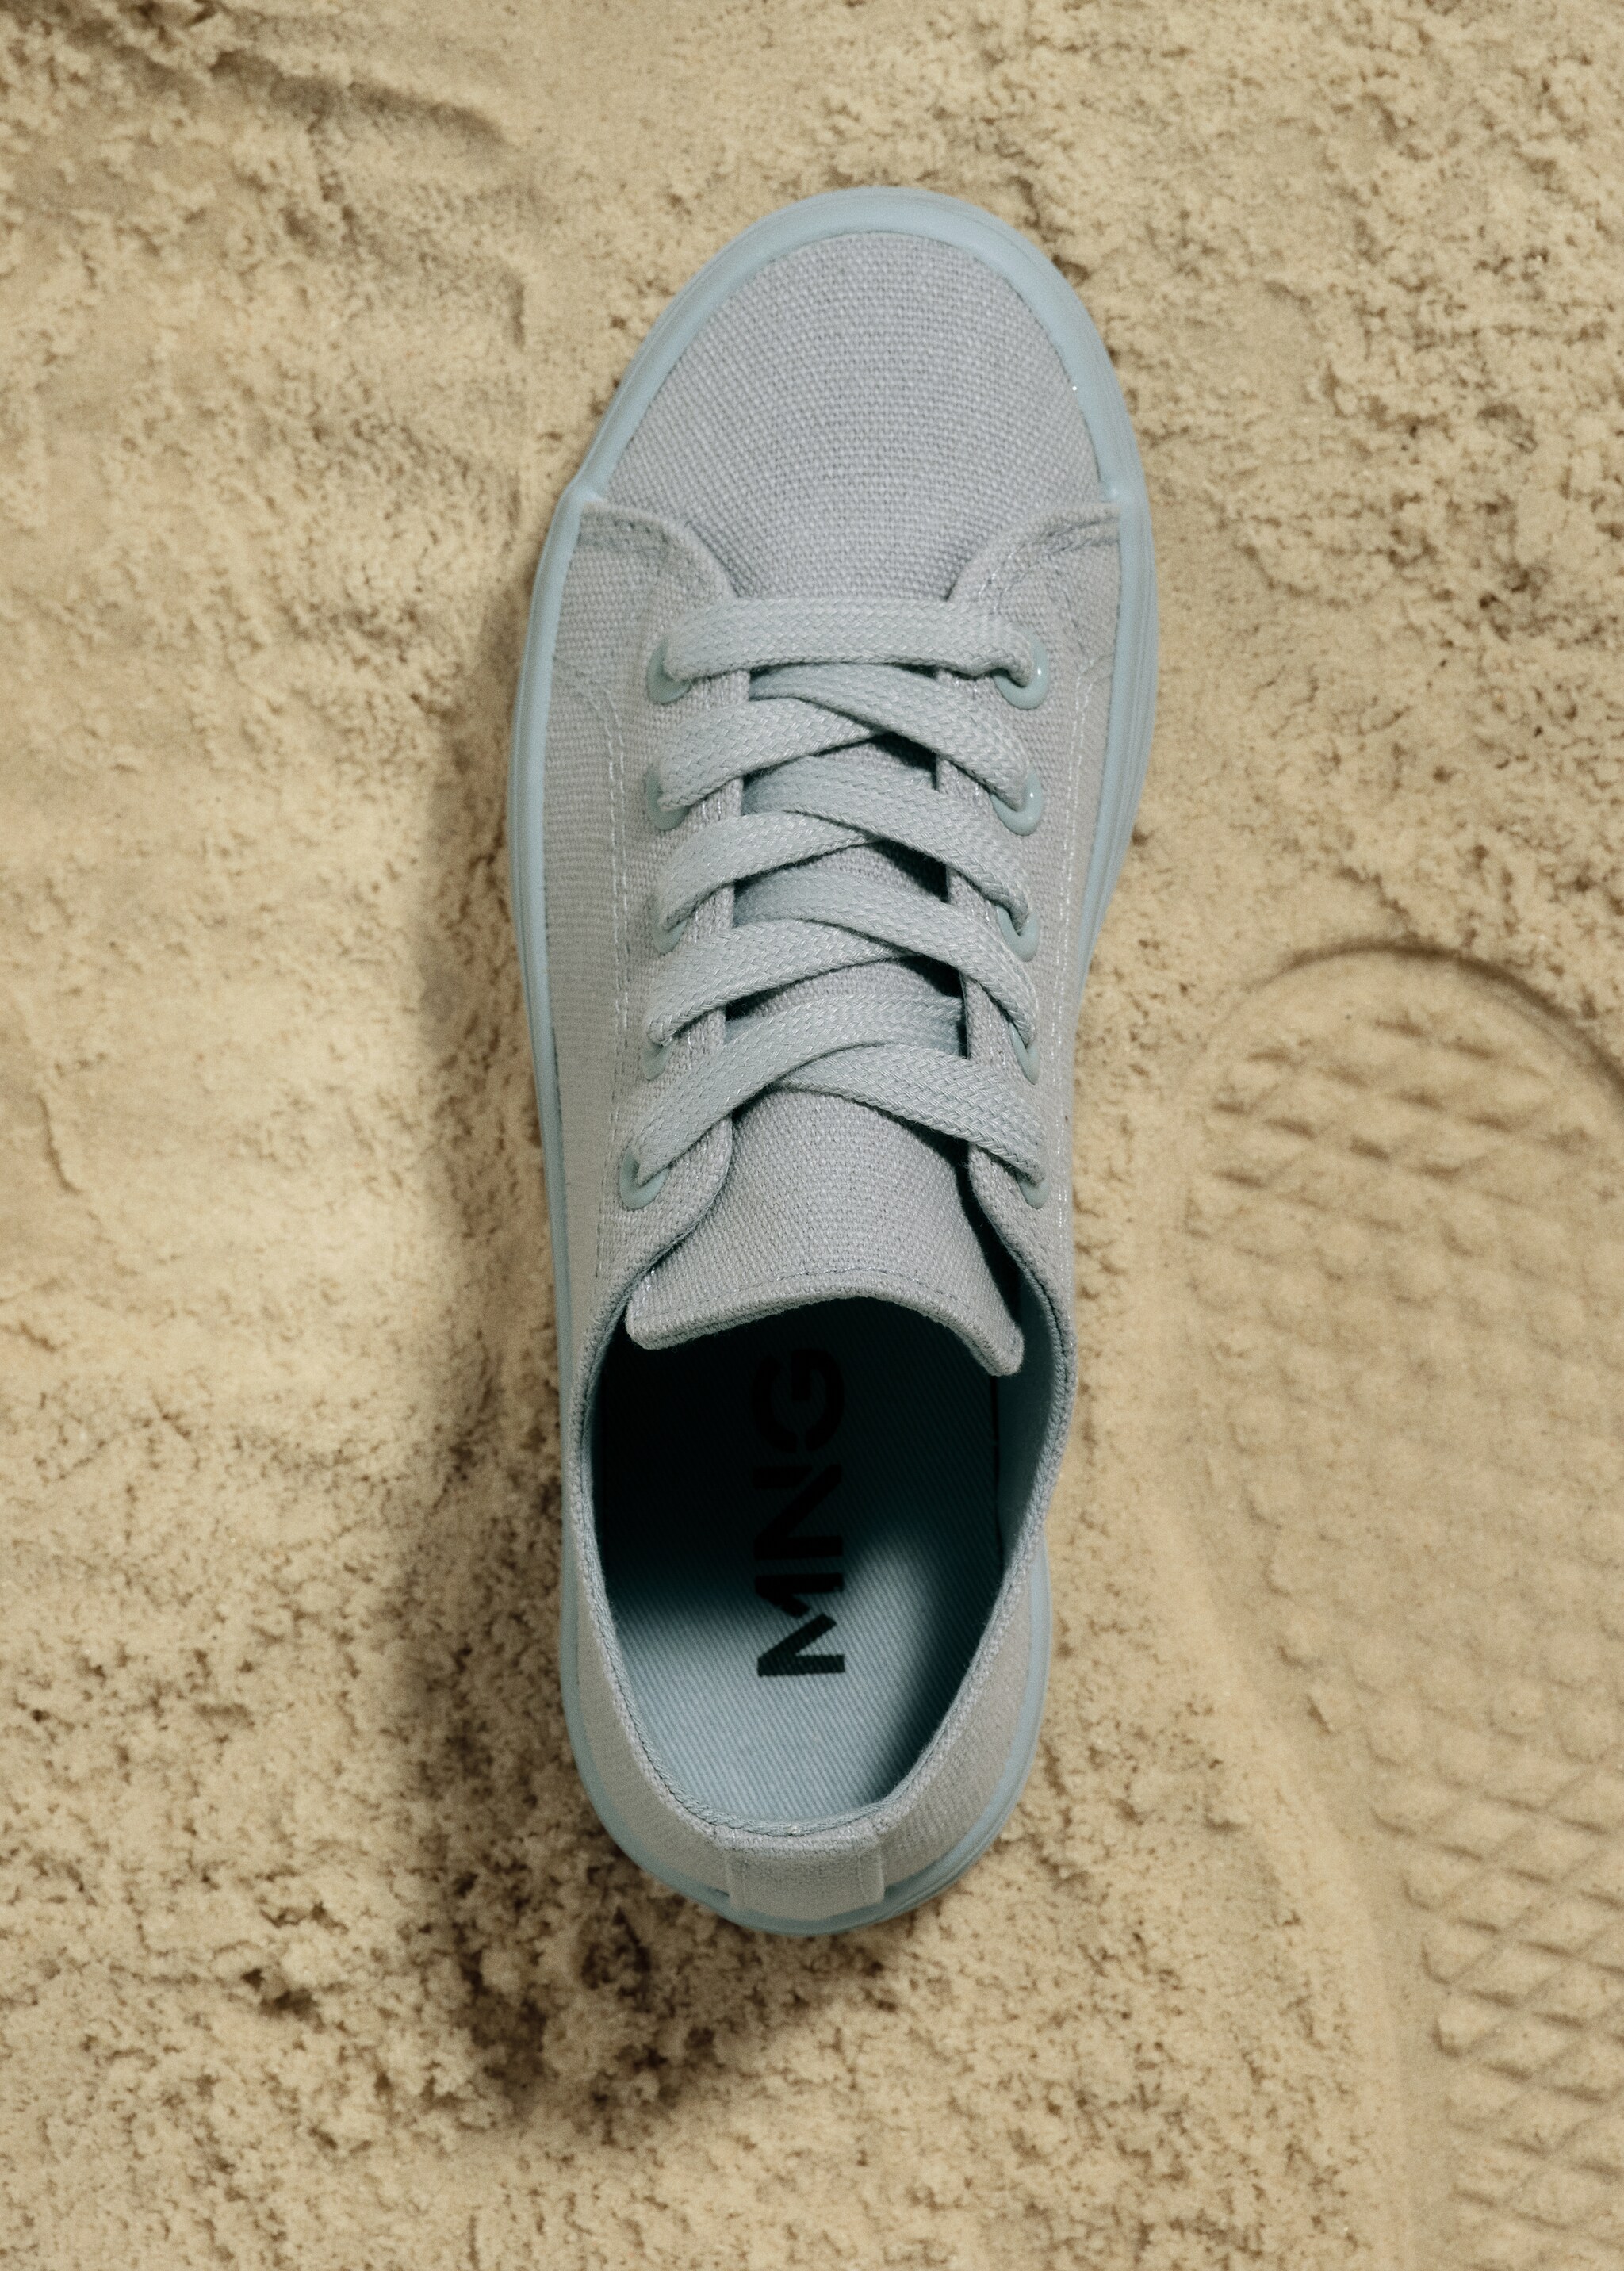 Lace-up cotton sneakers - General plane